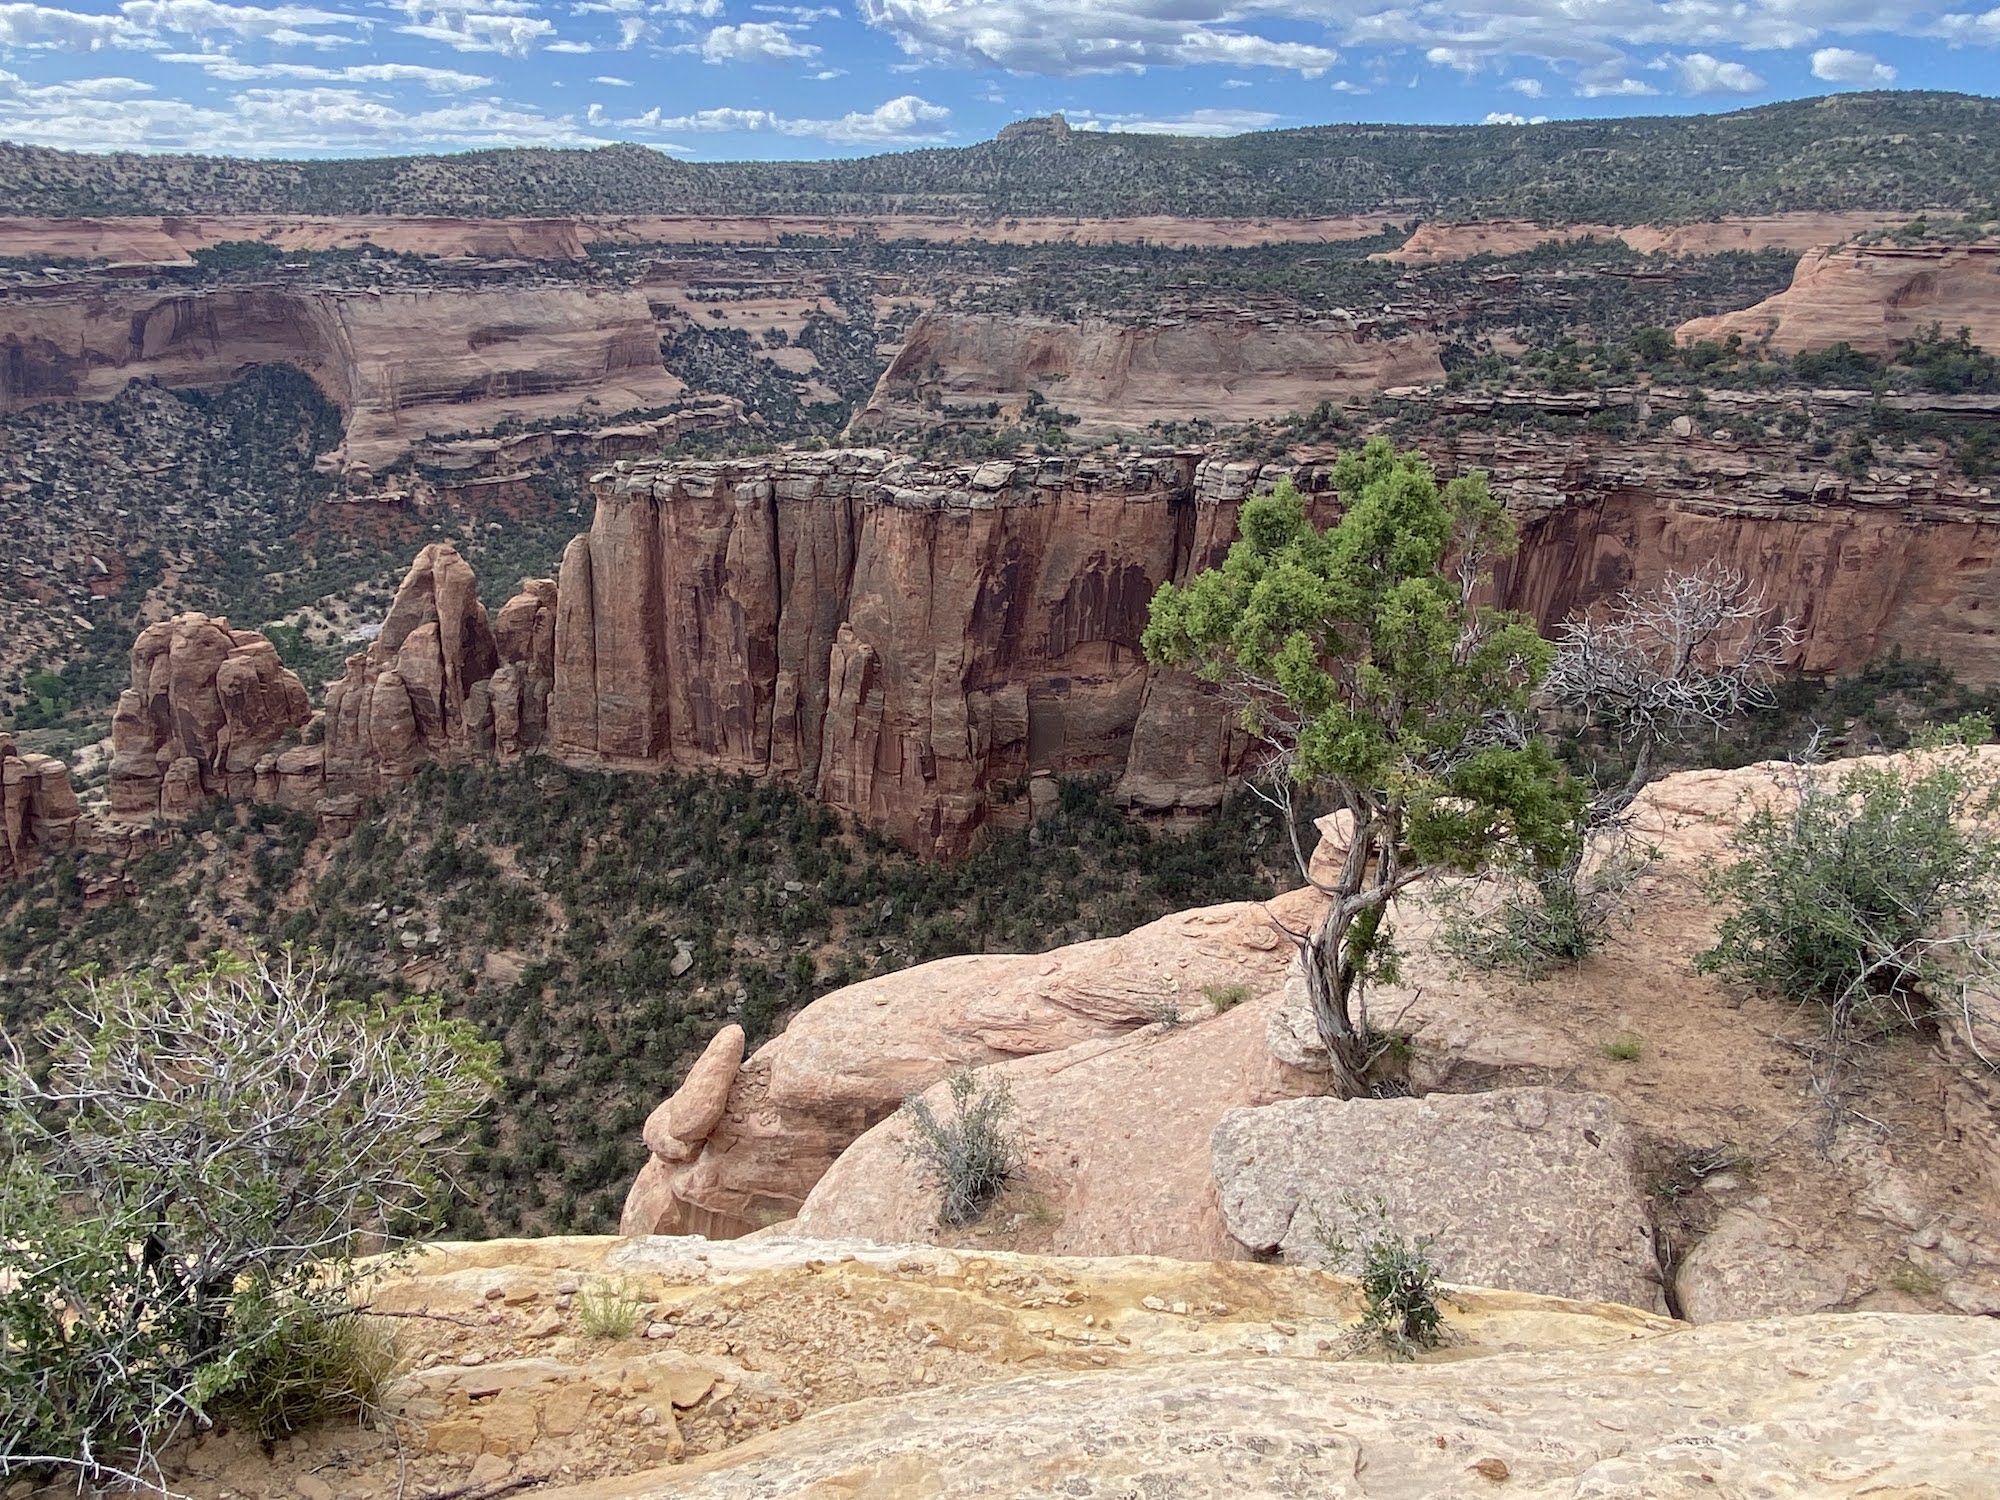 A canyon cut in layered sandstone formations at Colorado National Monument